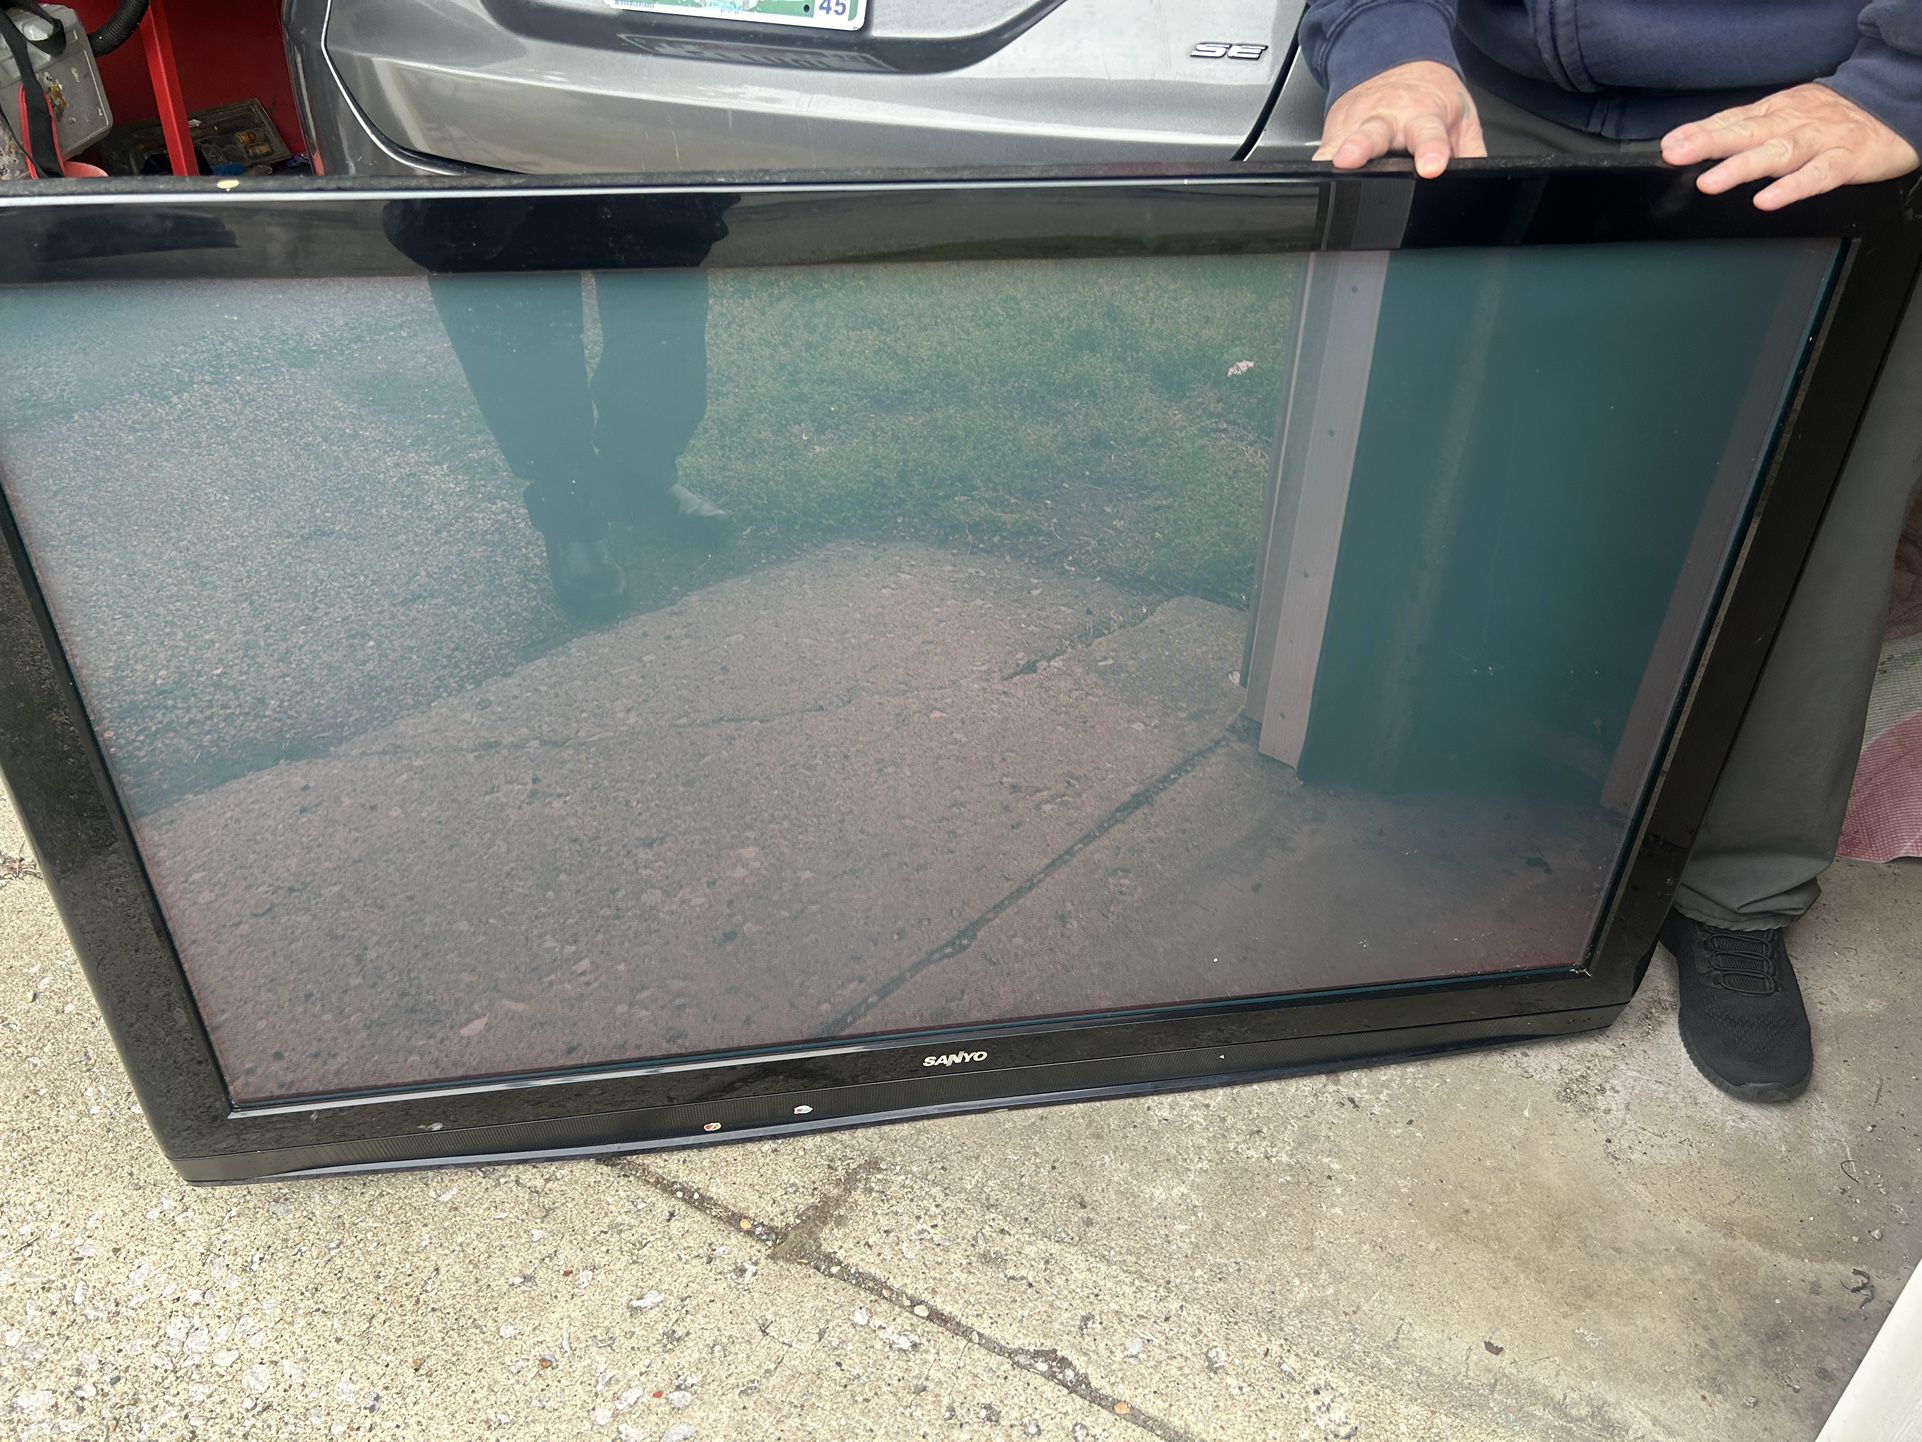 55” Inch Tv With Glass Table 